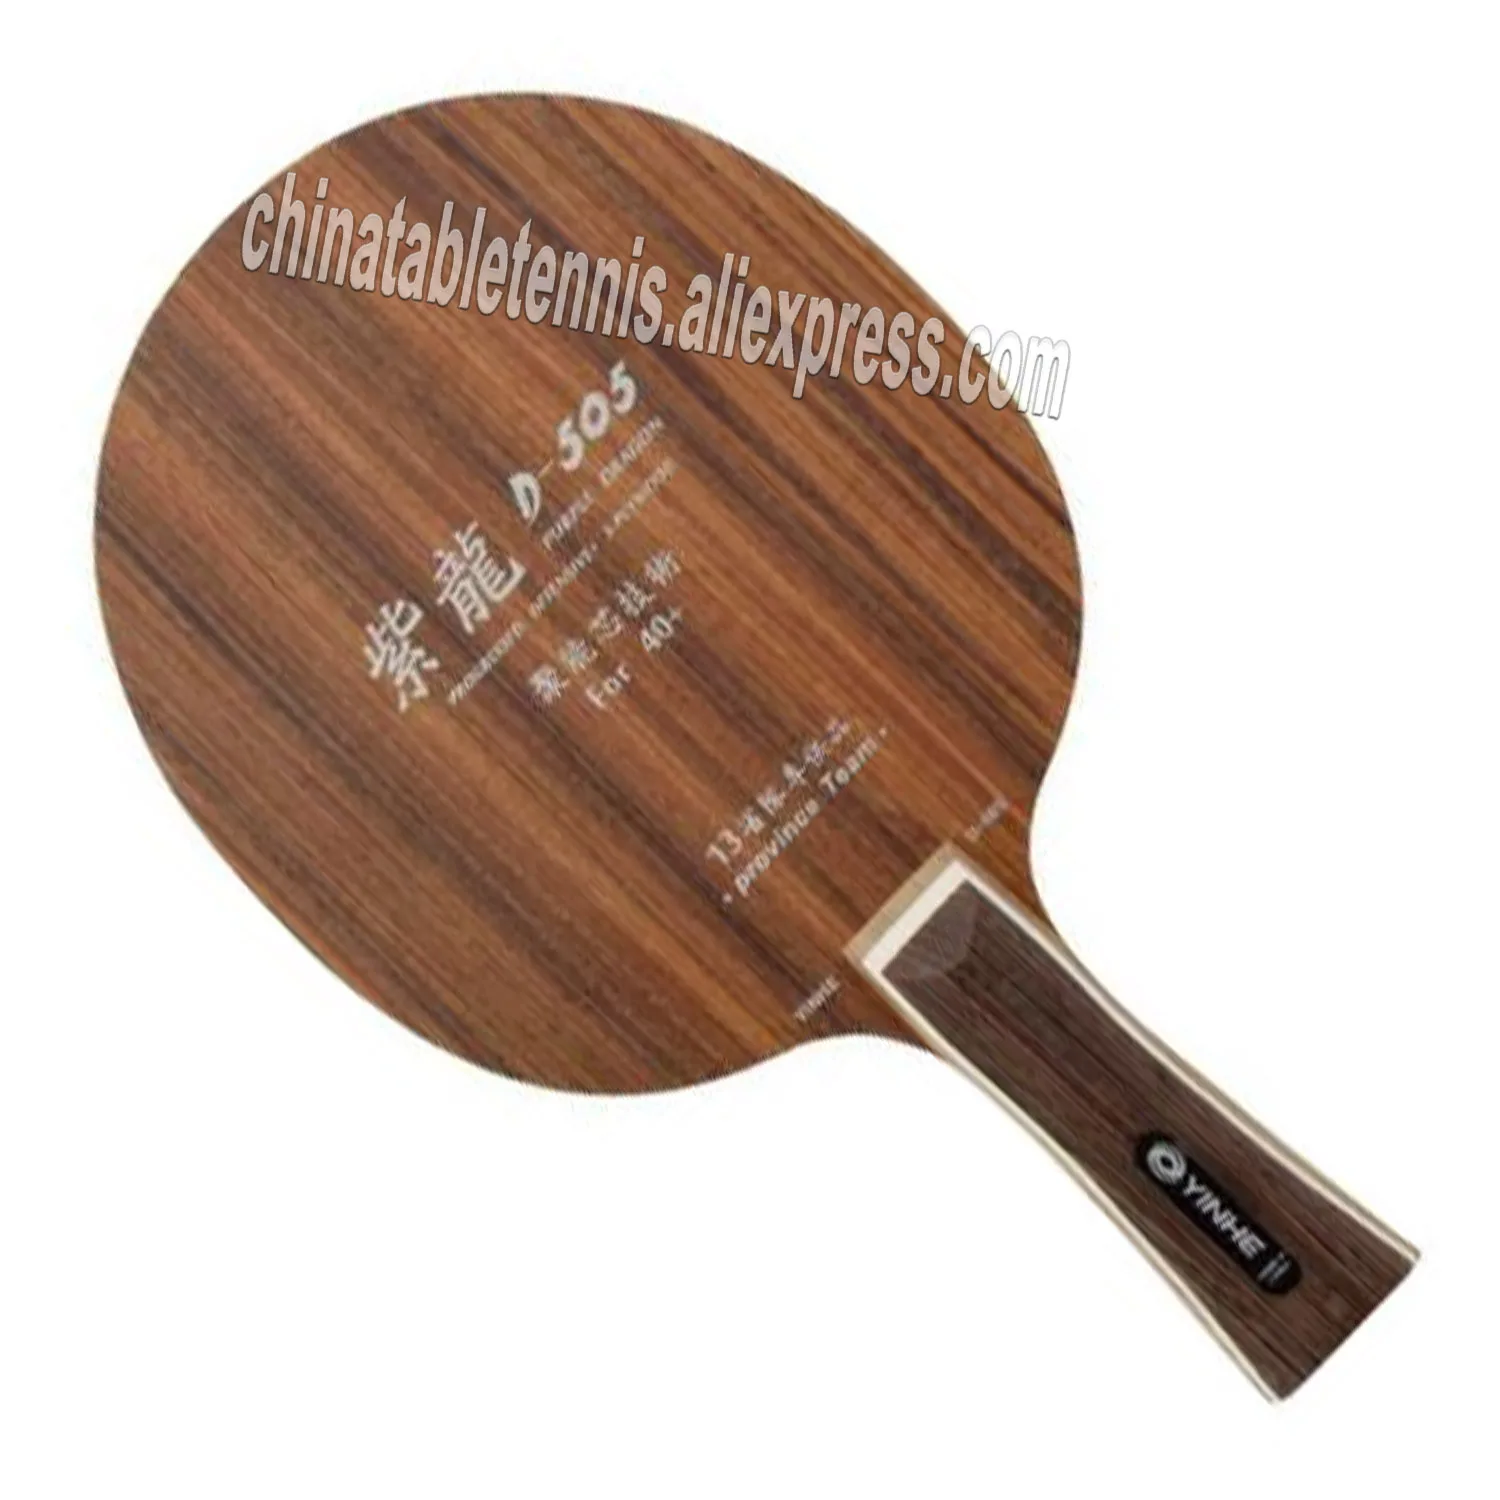 Yinhe Galaxy 505 Table Tennis Blade Rose Wood Progressed Offensive ( Poland National Team Wang Used ) Ping Pong Bat Racket